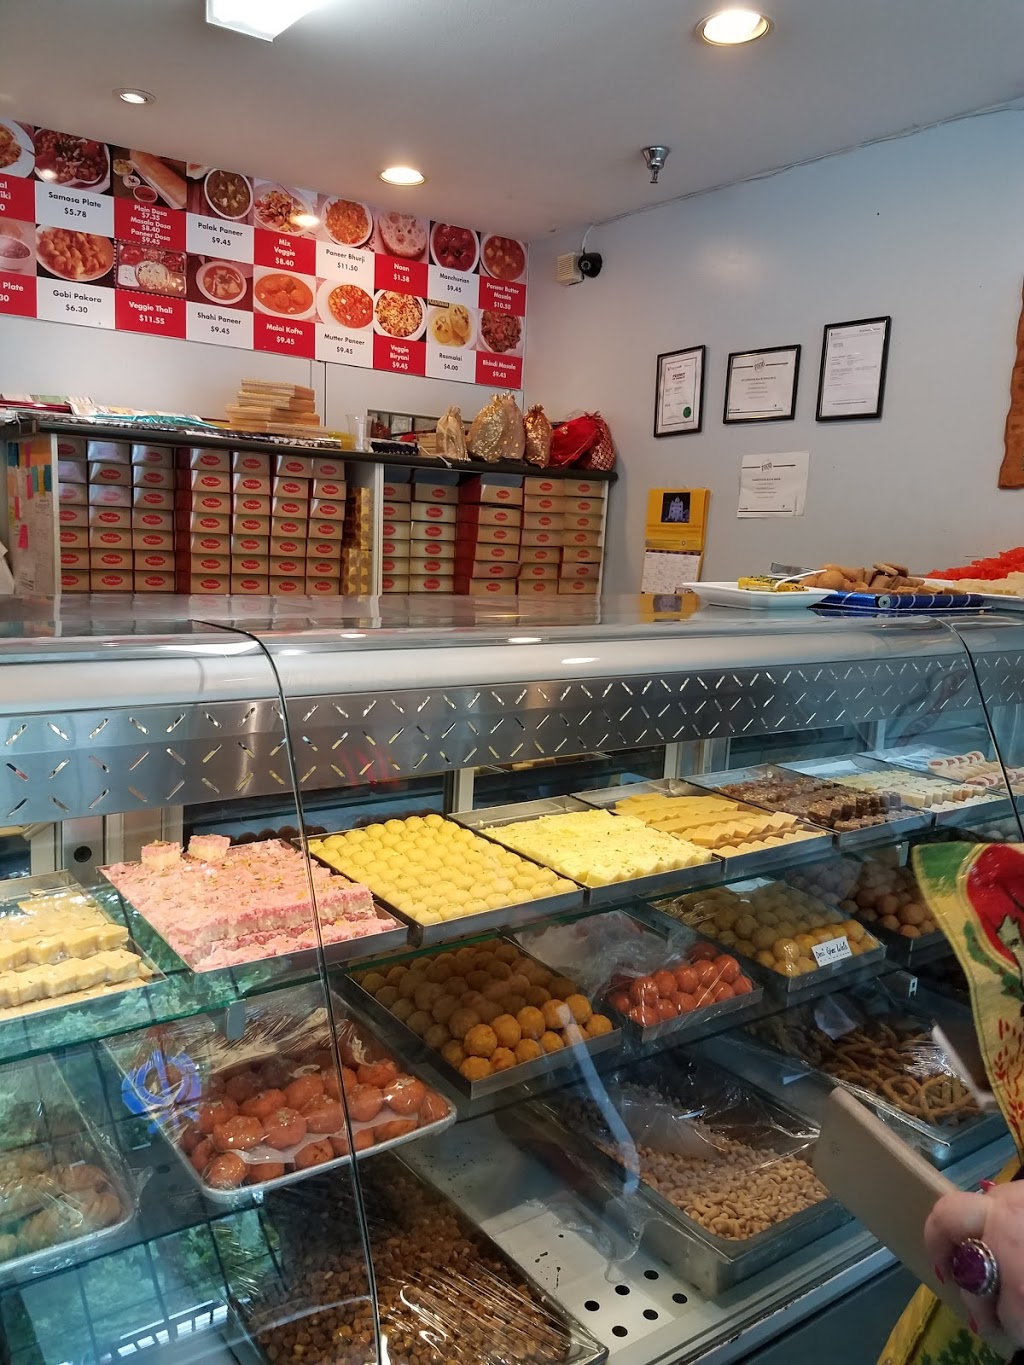 Dhaliwal Sweets & Chaat House | meal takeaway | 8430 128 St #4, Surrey, BC V3W 4G3, Canada | 6045961312 OR +1 604-596-1312